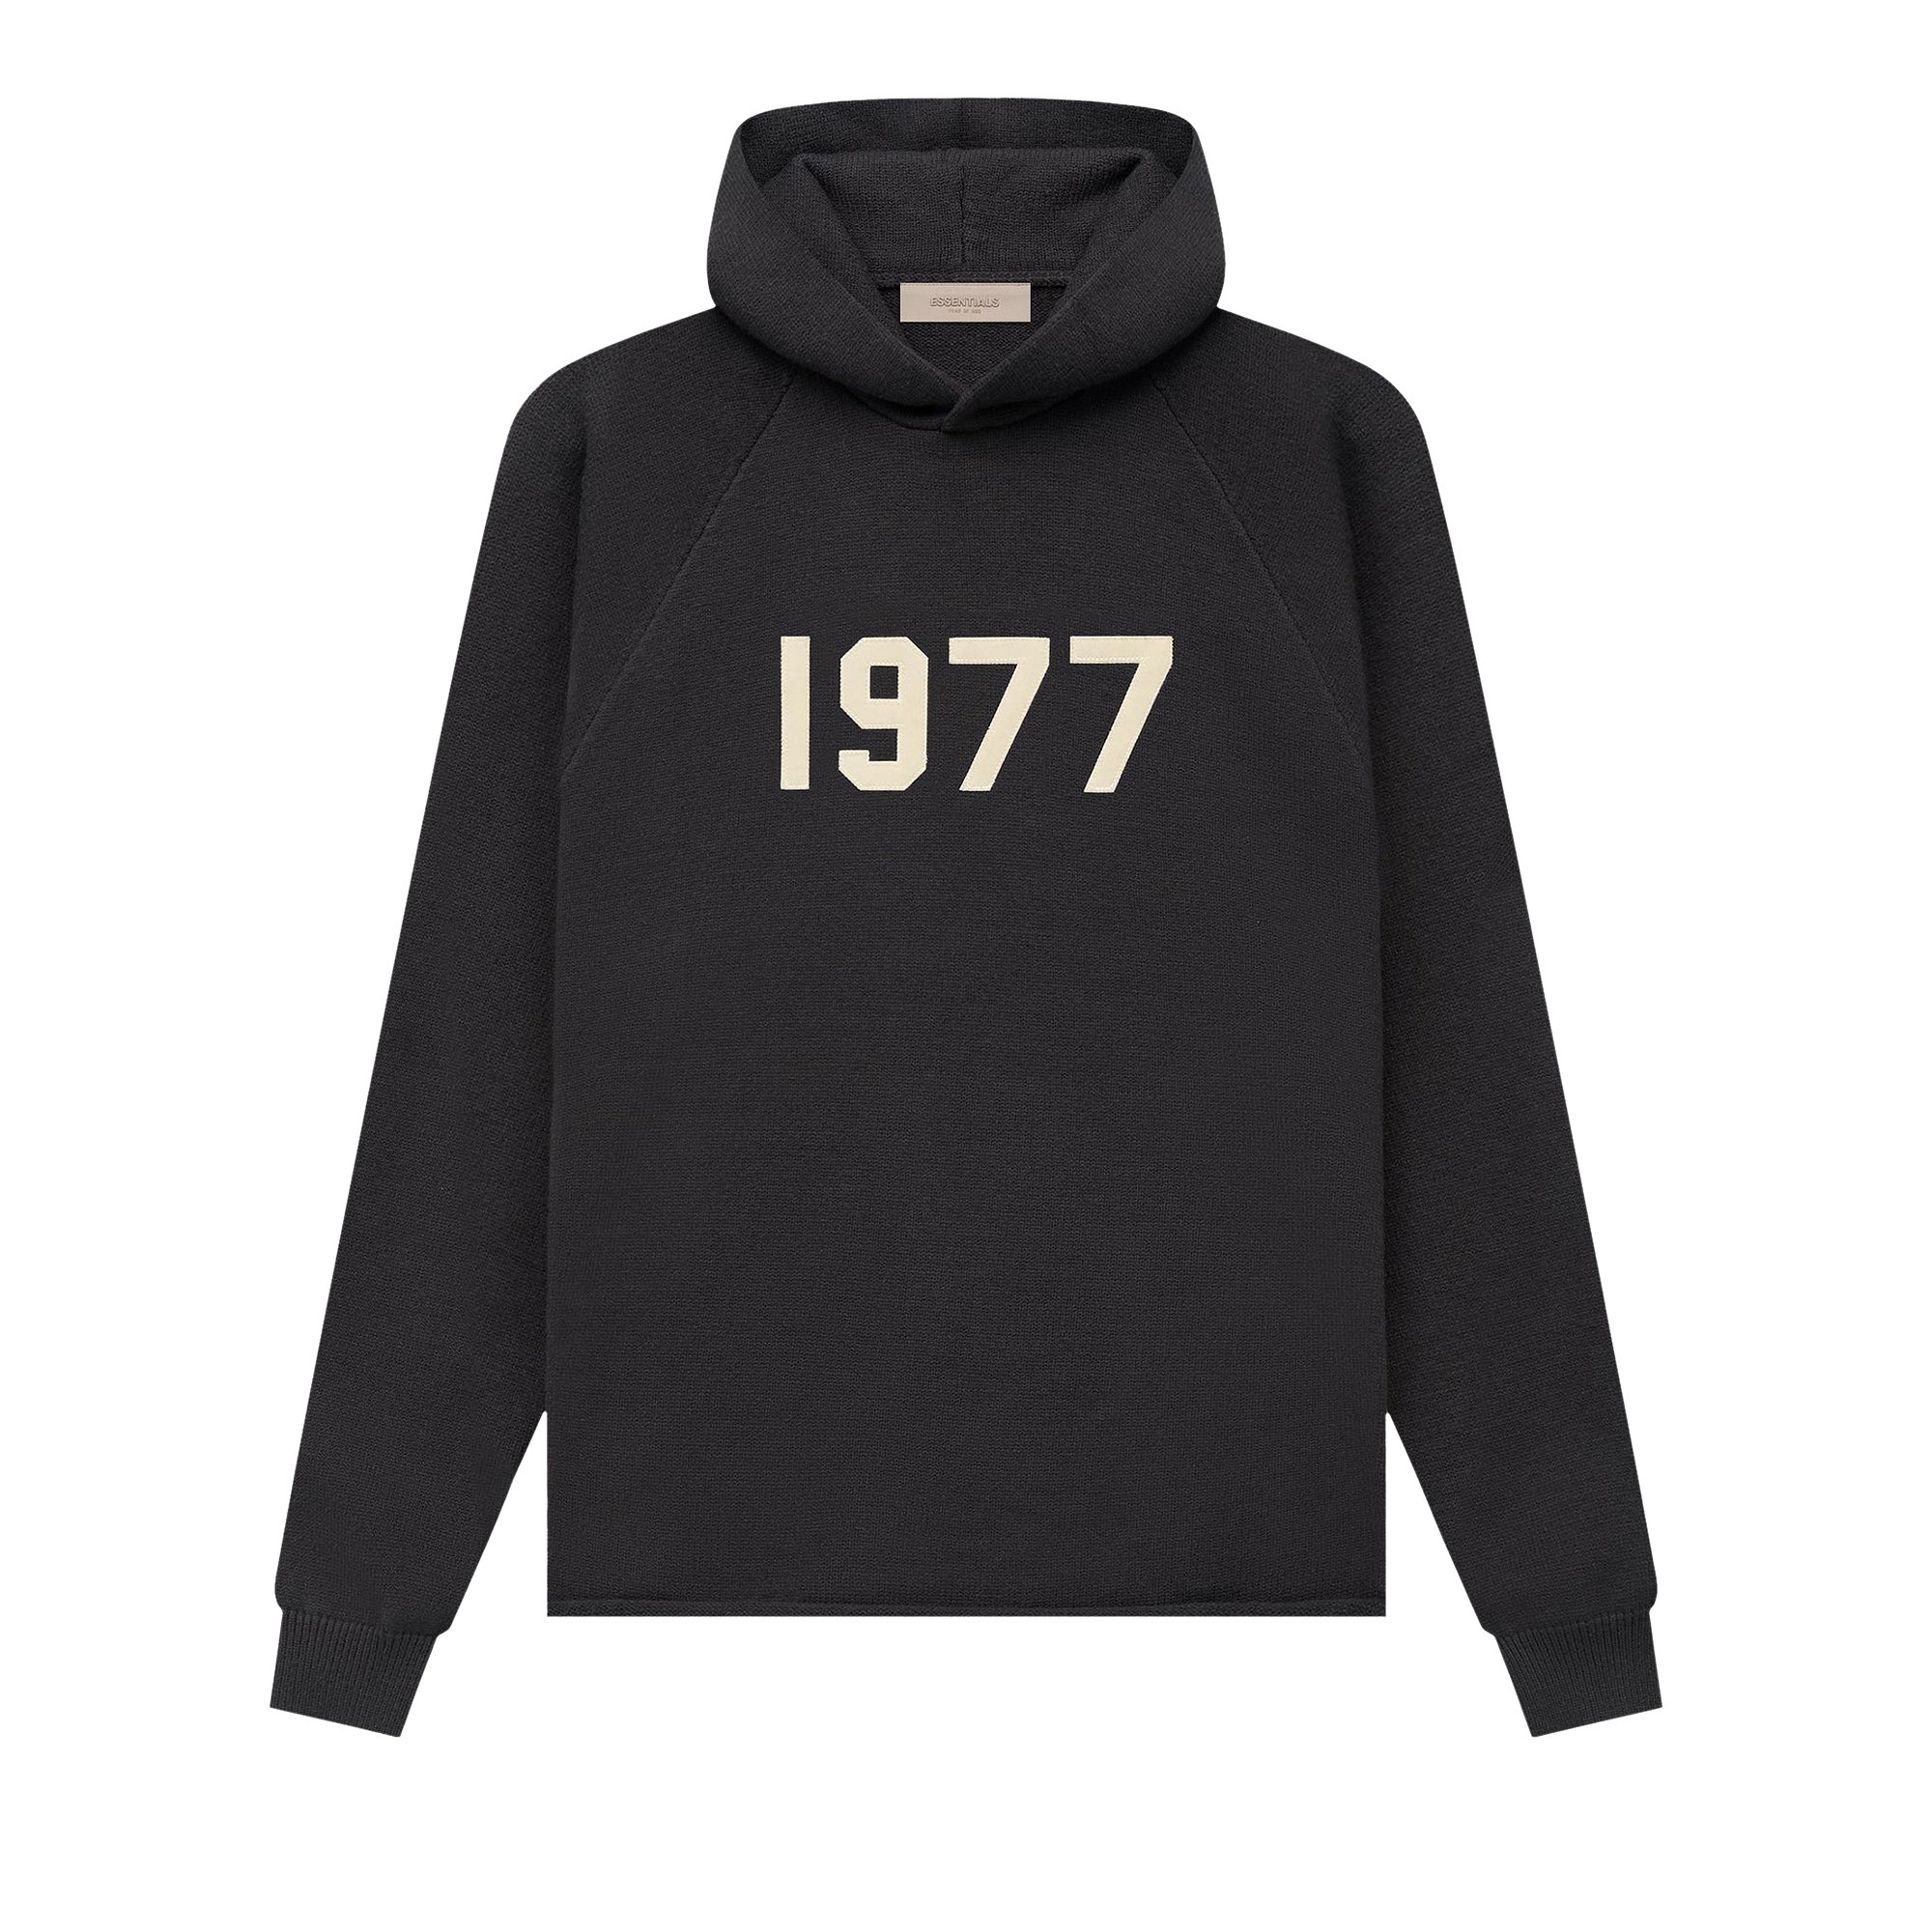 Fear of God Essentials Knit Hoodie 'Iron' | GOAT